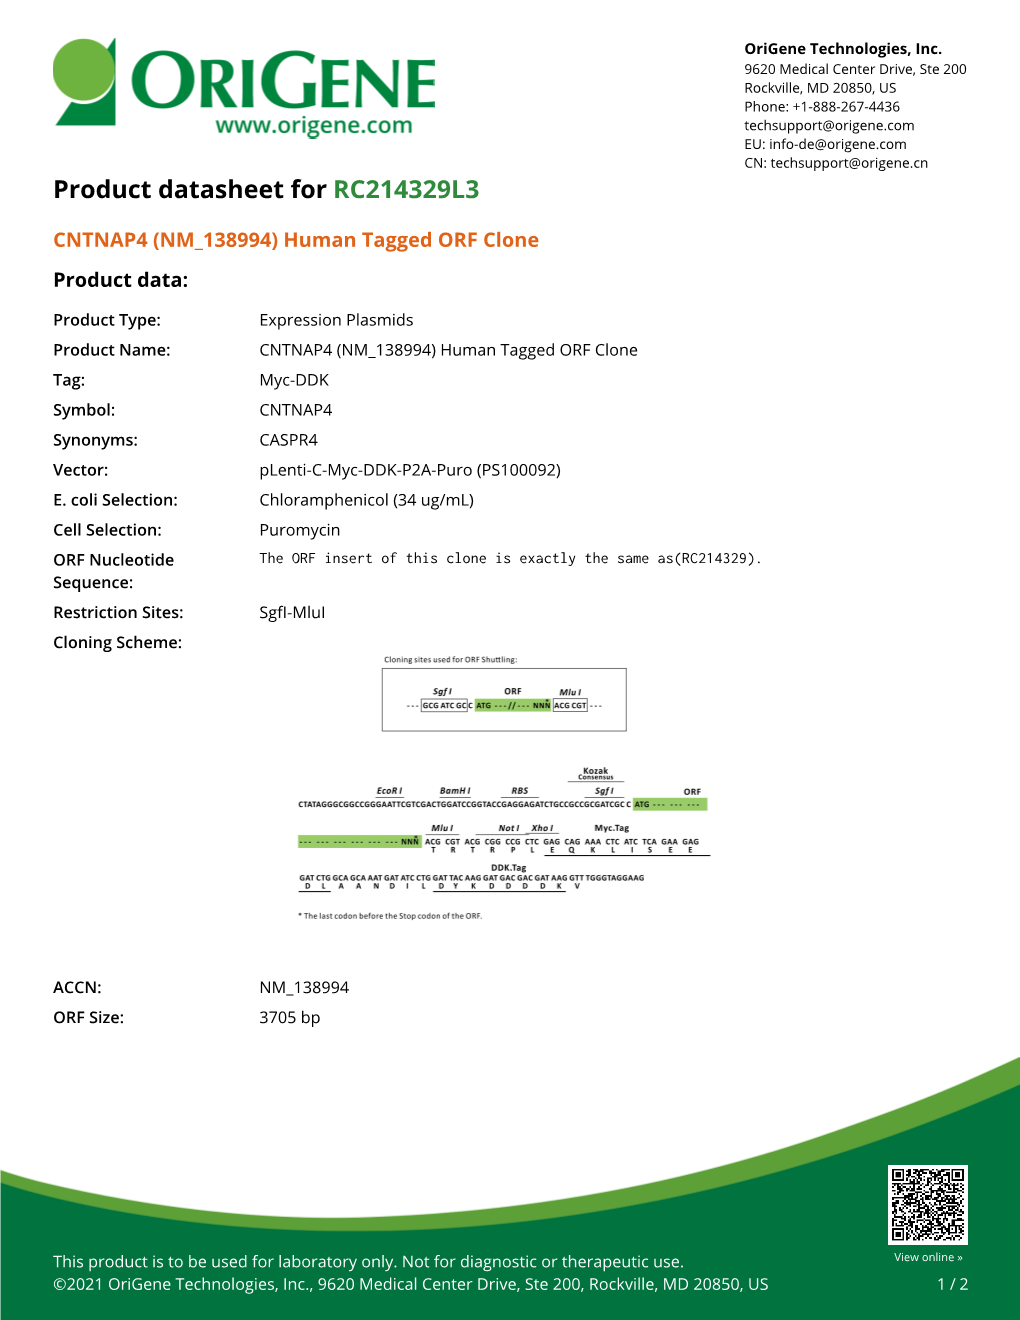 CNTNAP4 (NM 138994) Human Tagged ORF Clone Product Data